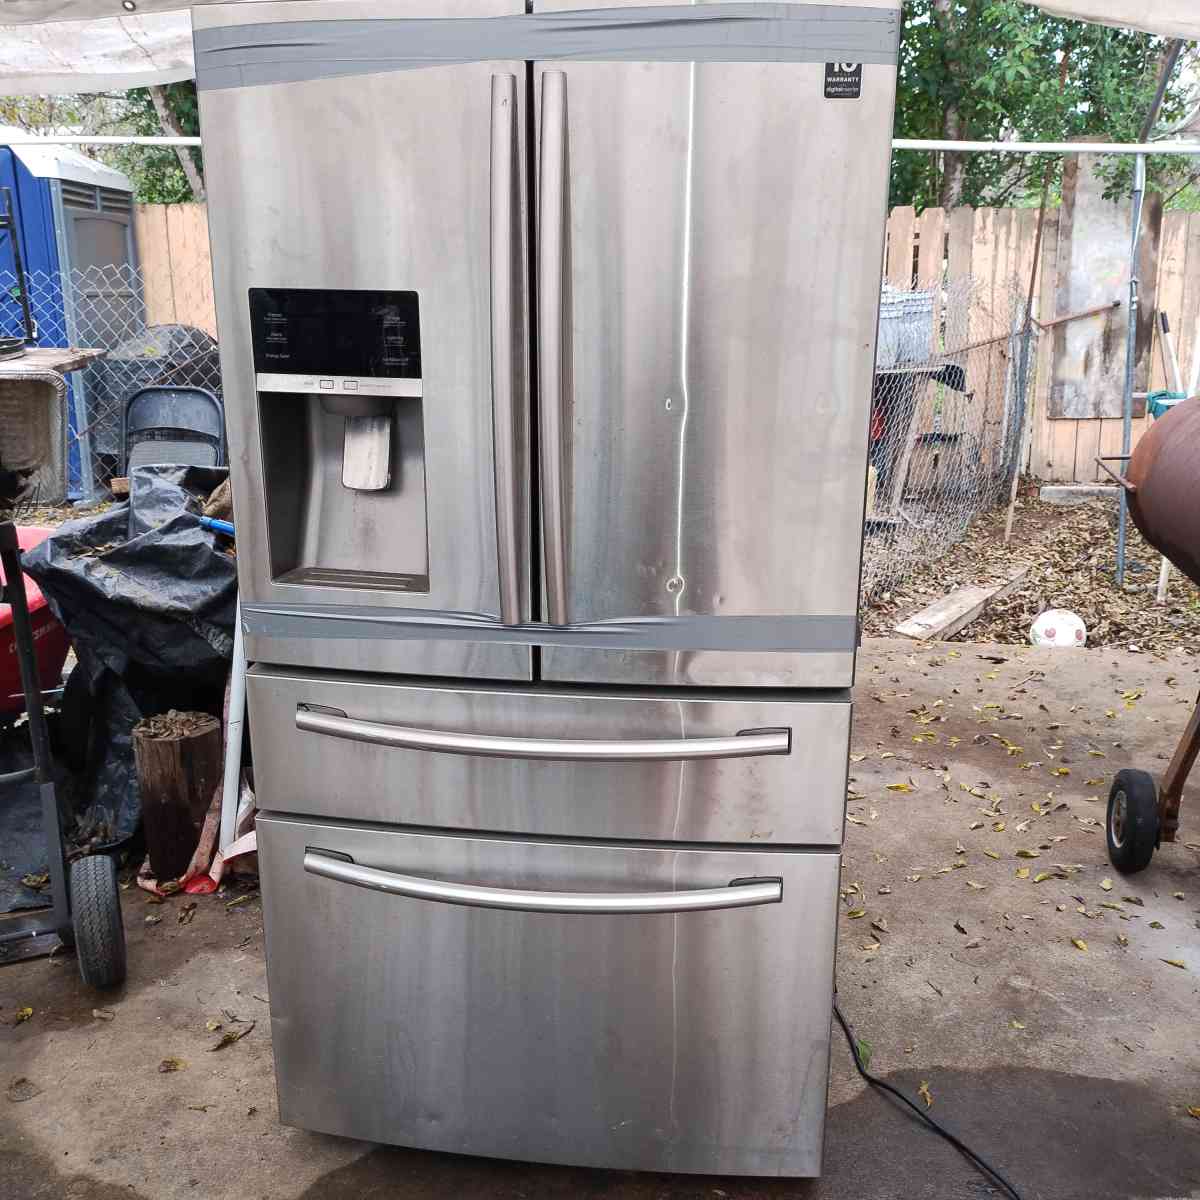 Samsung French Doors Stainless Steel Refrigerator